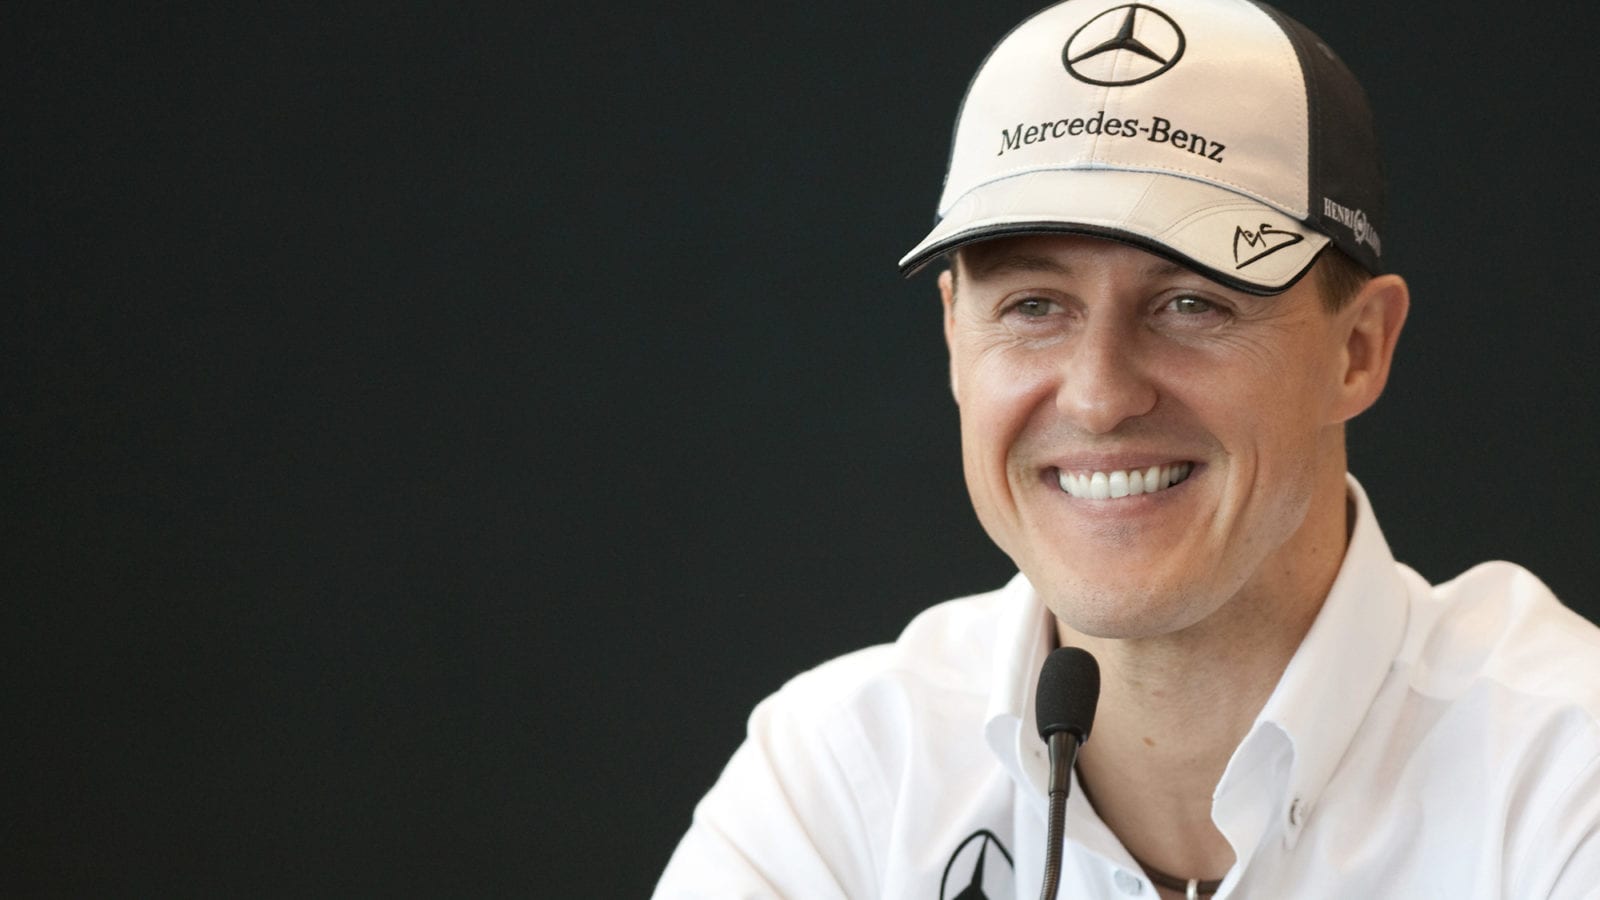 Michael Schumacher smiles in a press conference during his 2010 F1 comeback year